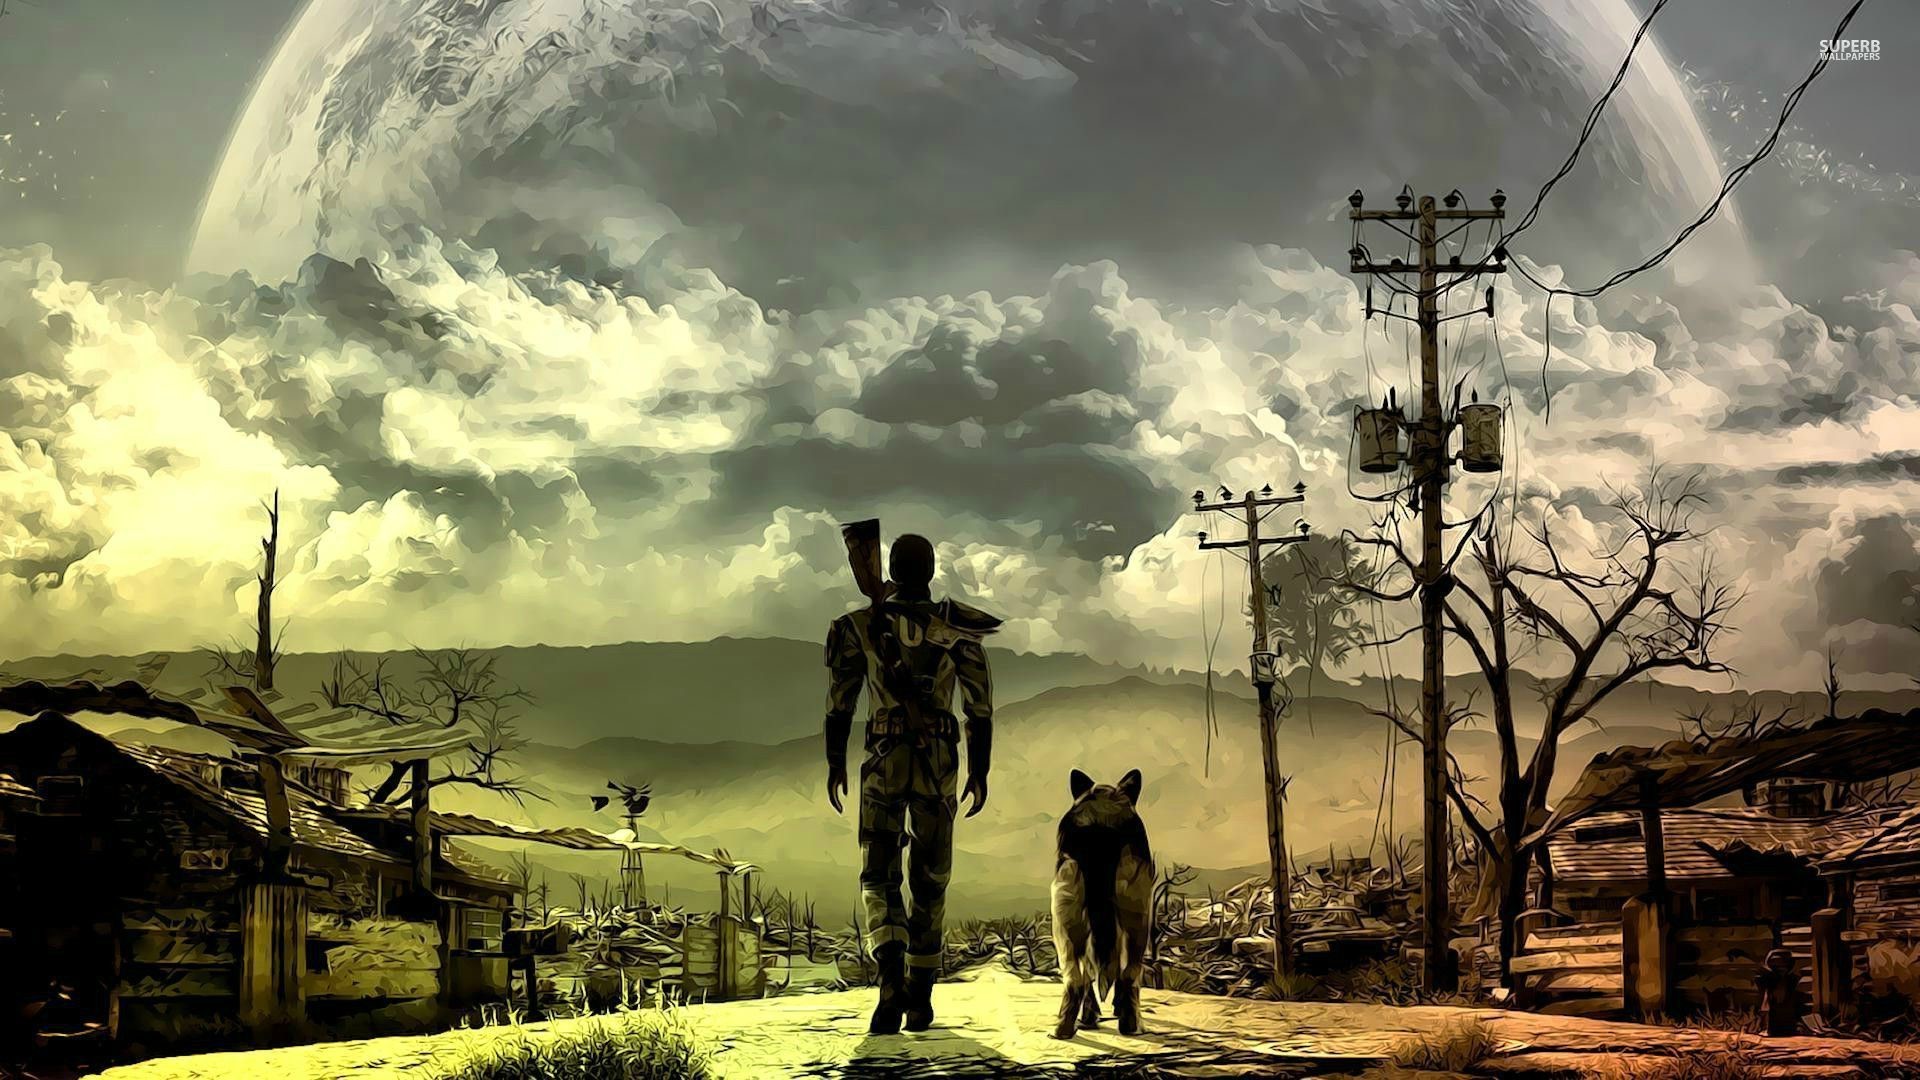 1920x1080 Fallout HD Wallpapers Backgrounds Wallpaper | HD Wallpapers | Pinterest |  Hd wallpaper, Wallpaper backgrounds and Wallpaper